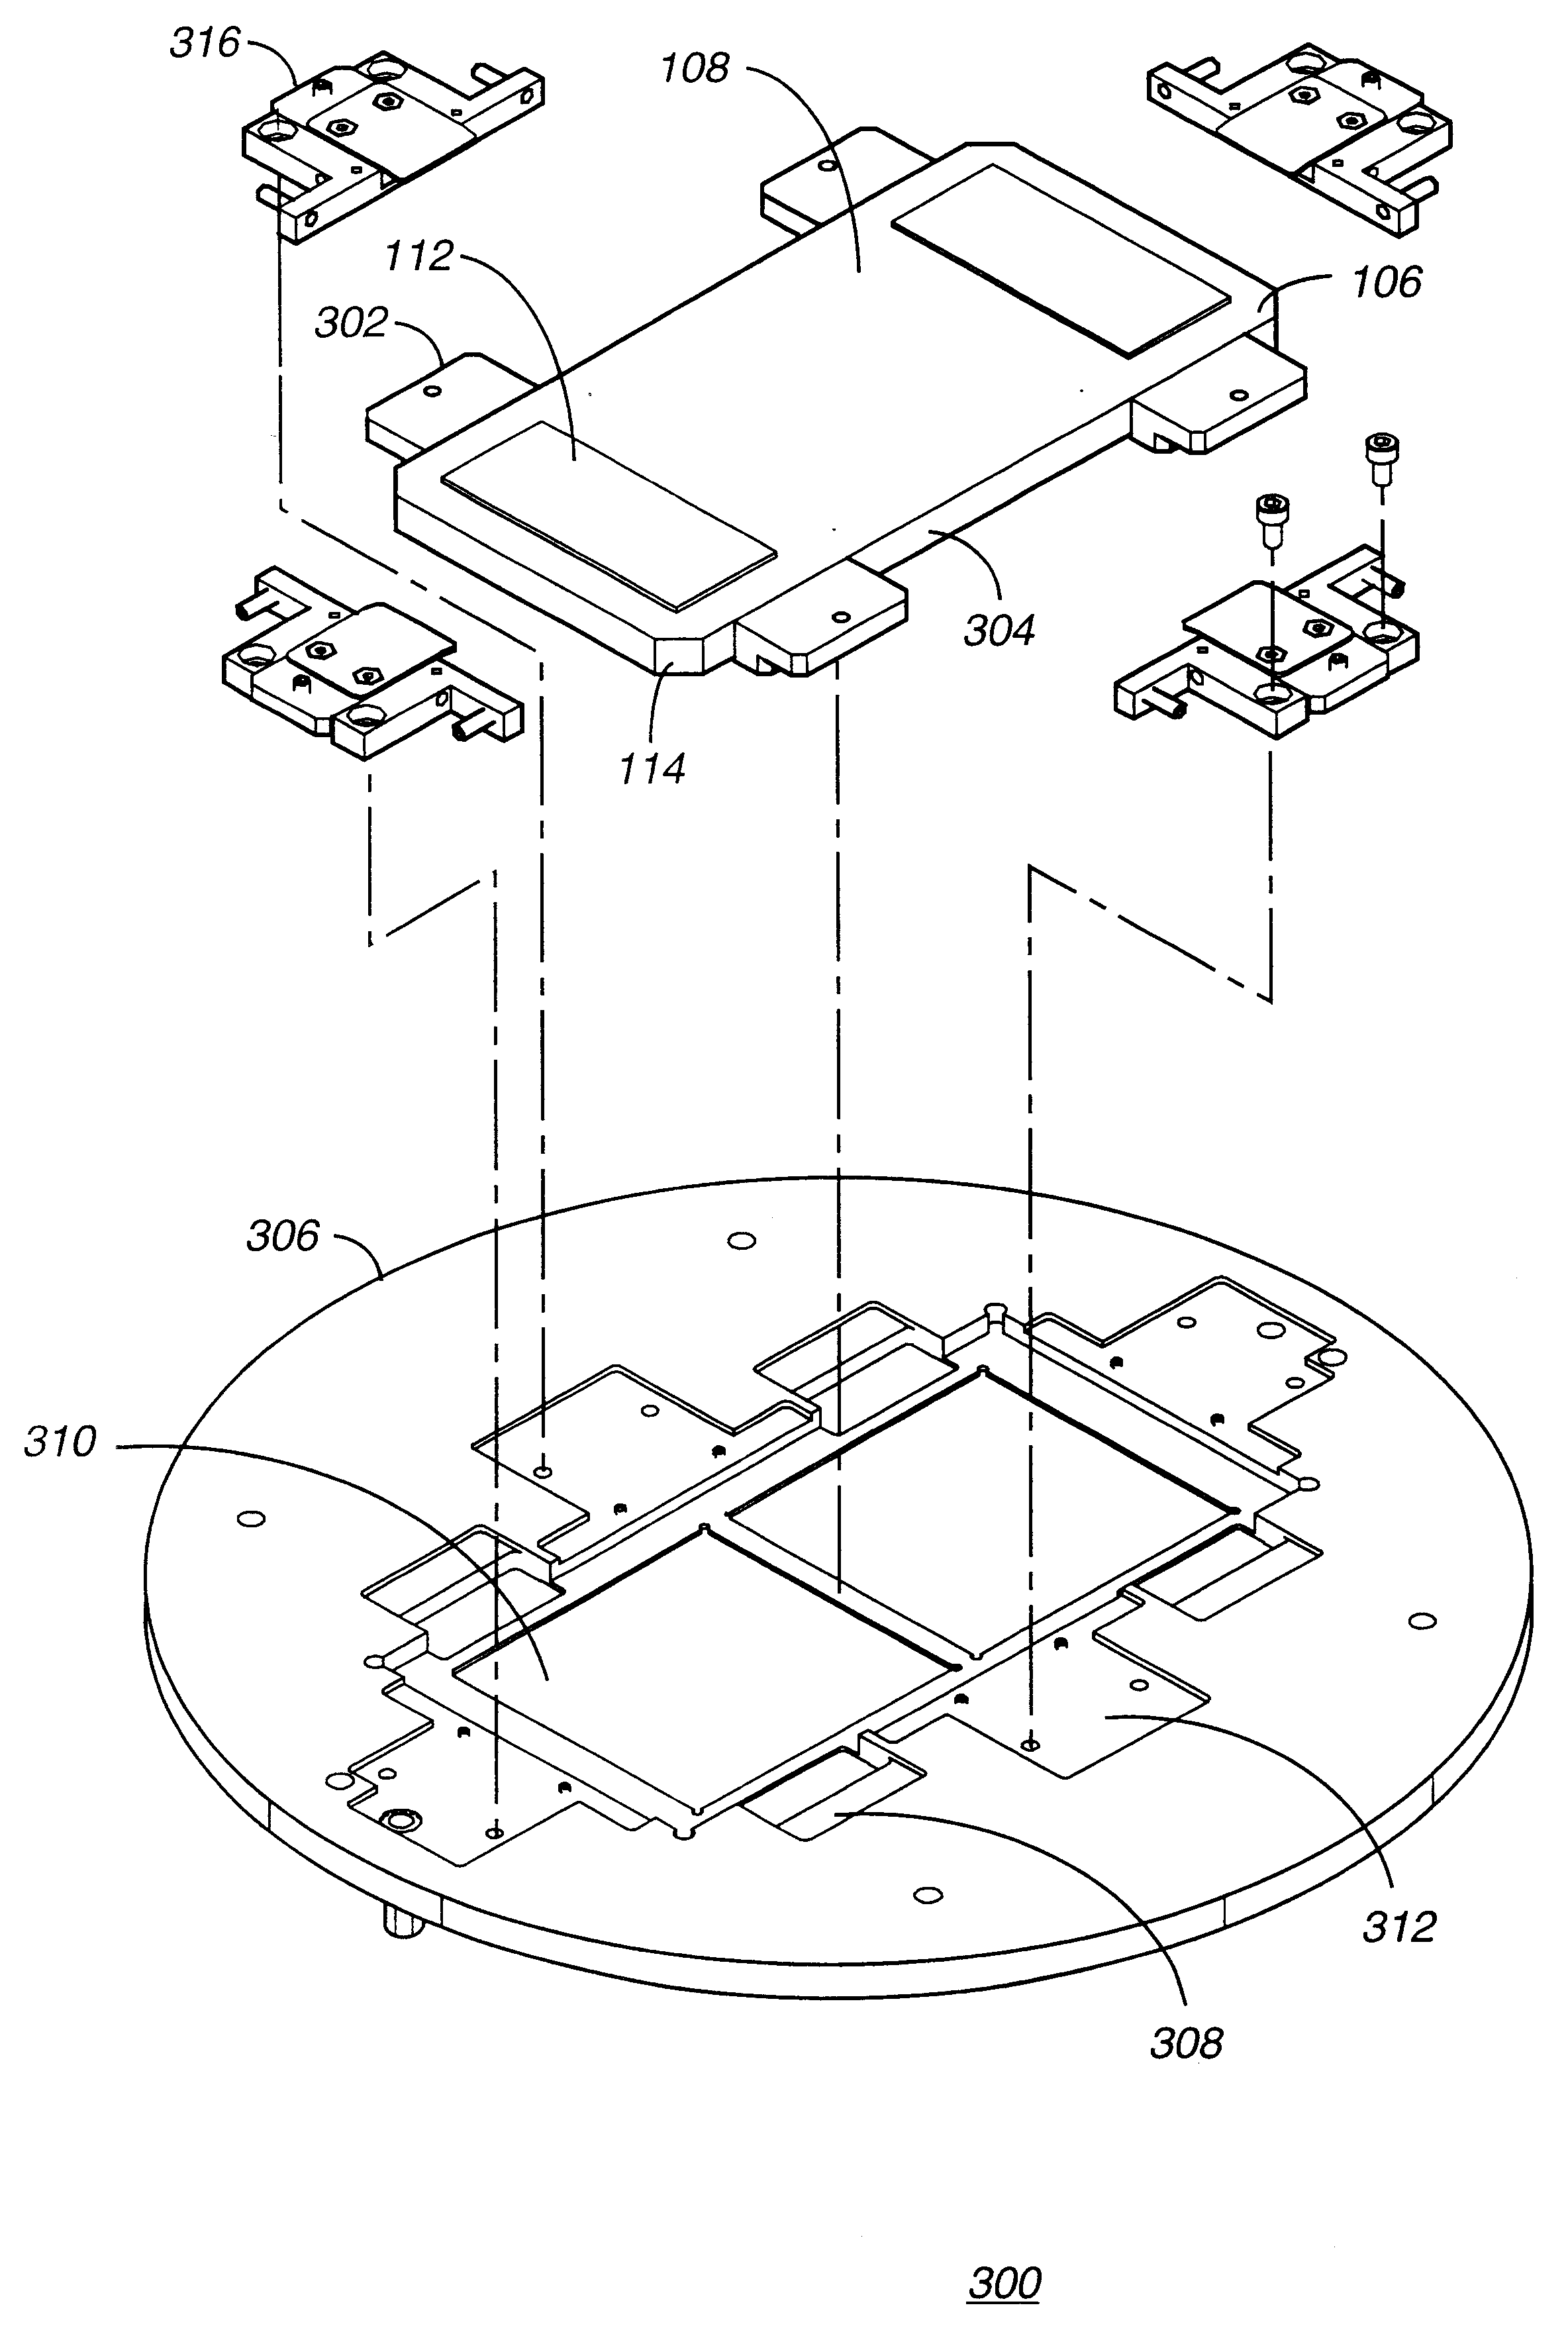 Mechanical fixture for holding electronic devices under test showing adjustments in multiple degrees of freedom